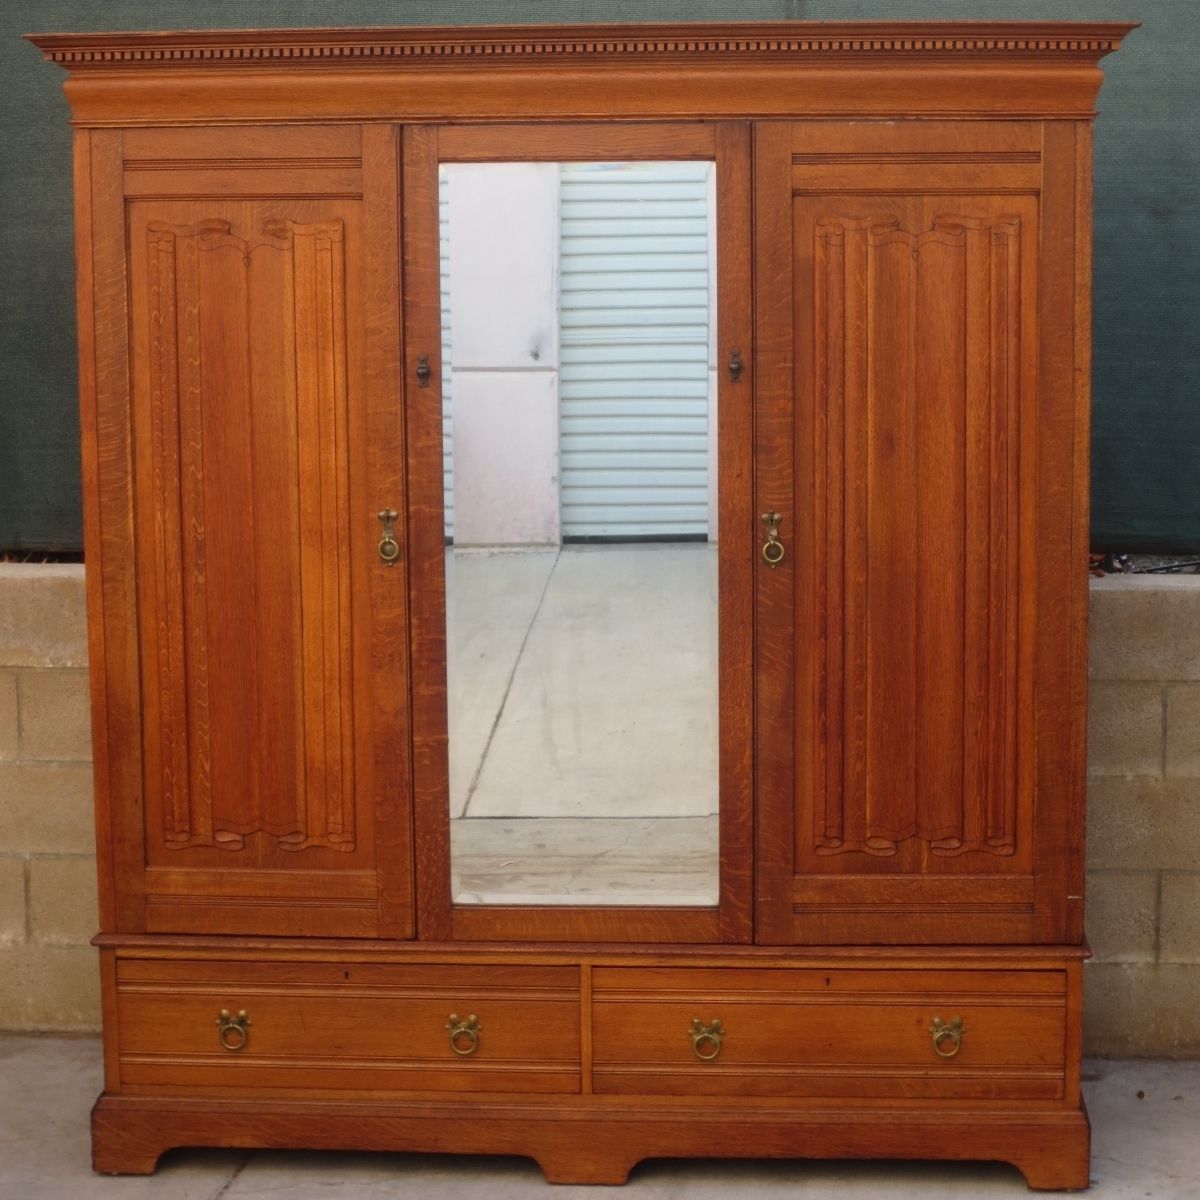 Antique Wardrobes For Most Popular Antique Wardrobe Closet With Drawers (View 8 of 15)